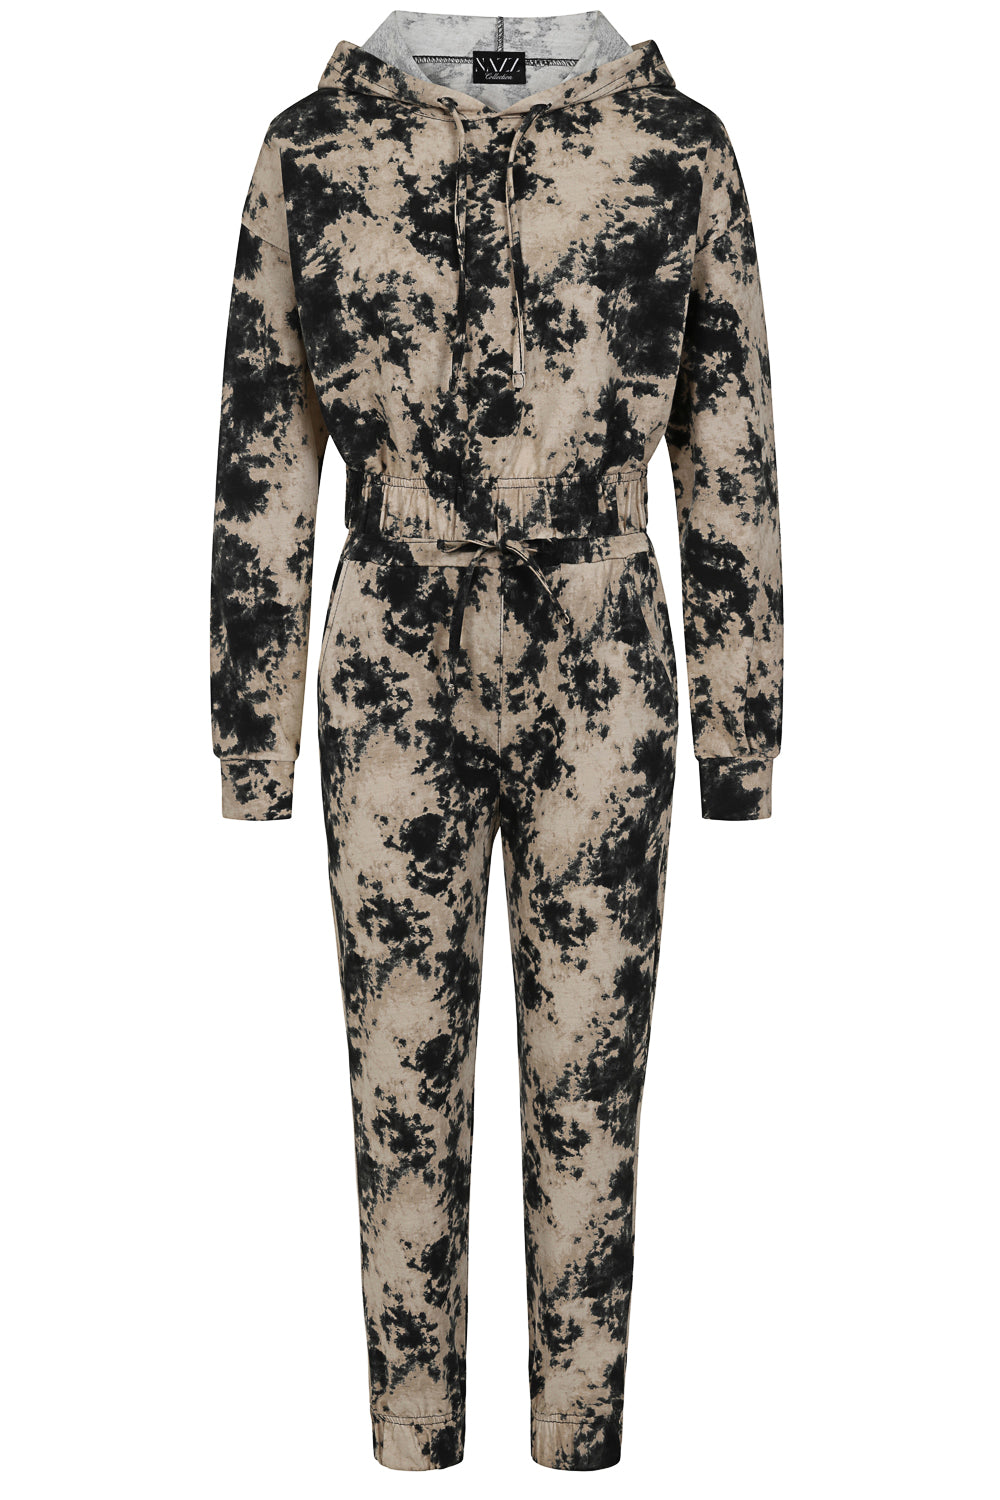 Haven Black and Beige Two Tone Tie Dye 2 Piece Tracksuit Set